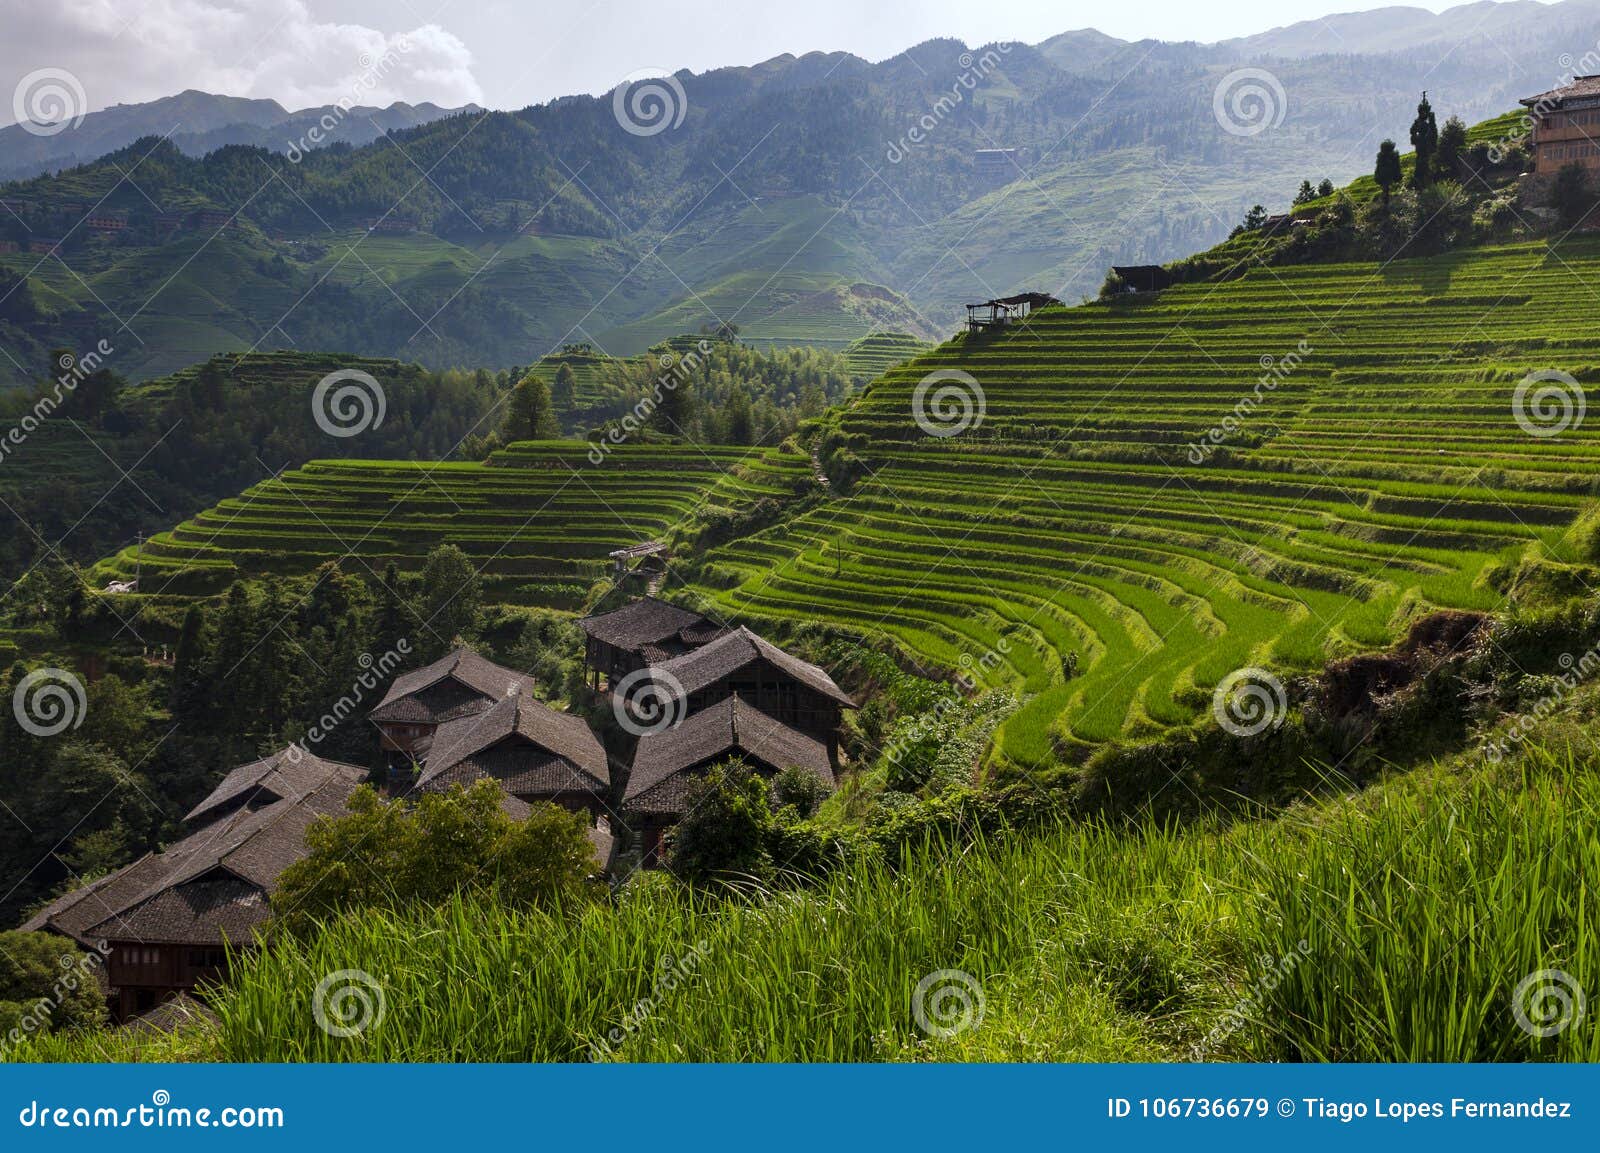 beautiful view longsheng rice terraces near the of the dazhai village in the province of guangxi, china